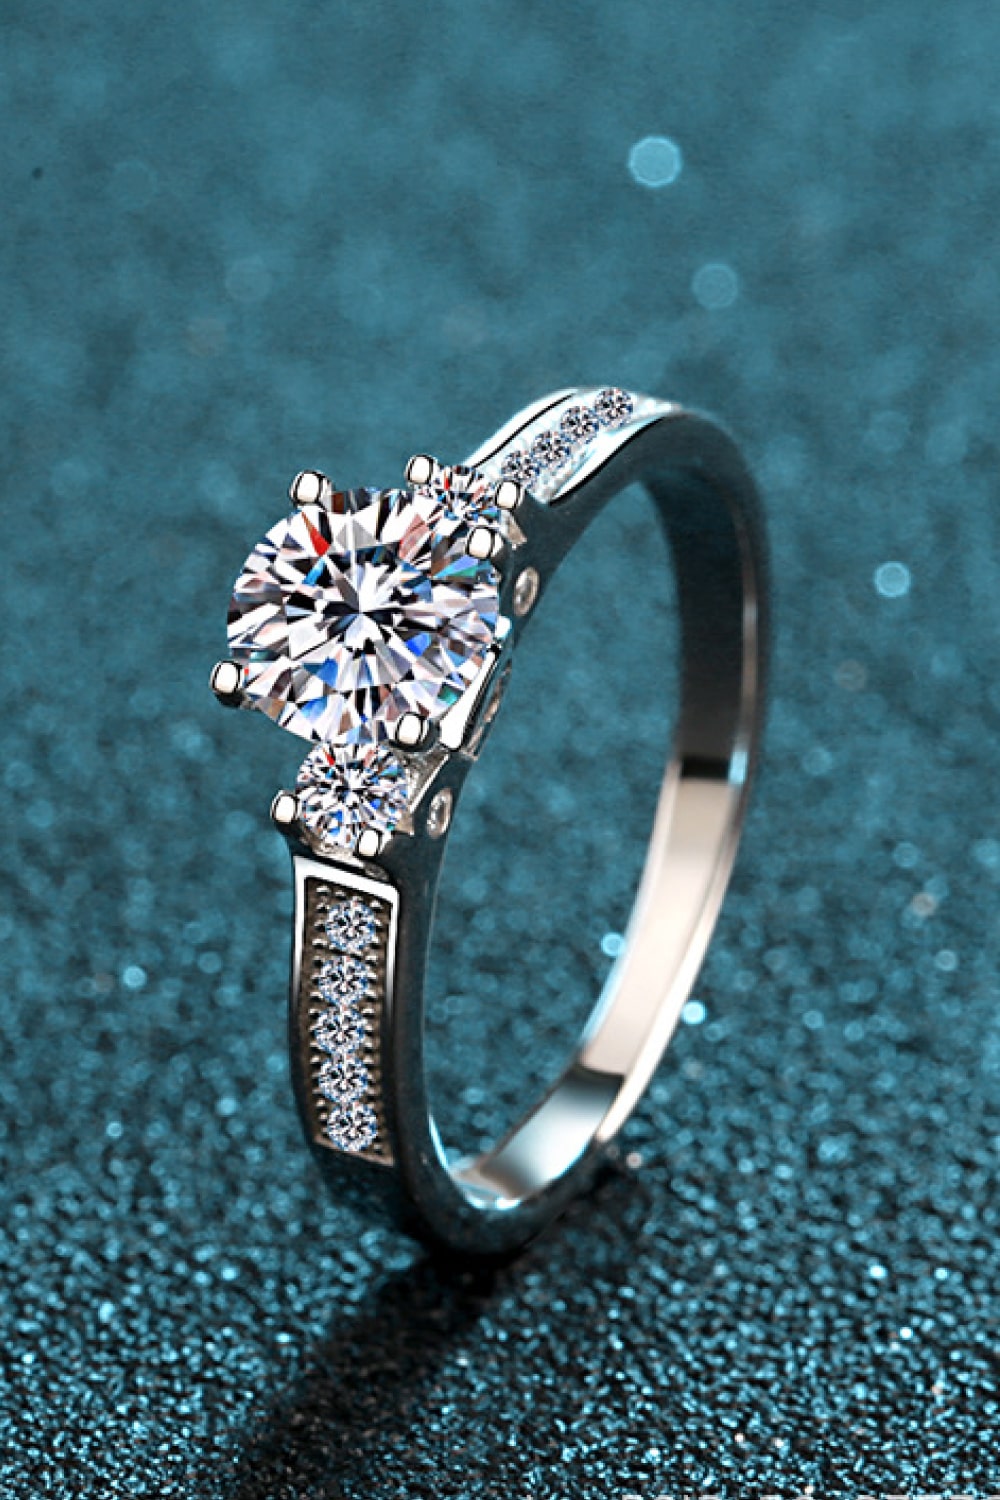 Lucky Charm Brilliant Round Cut Moissanite Rhodium-Plated Ring